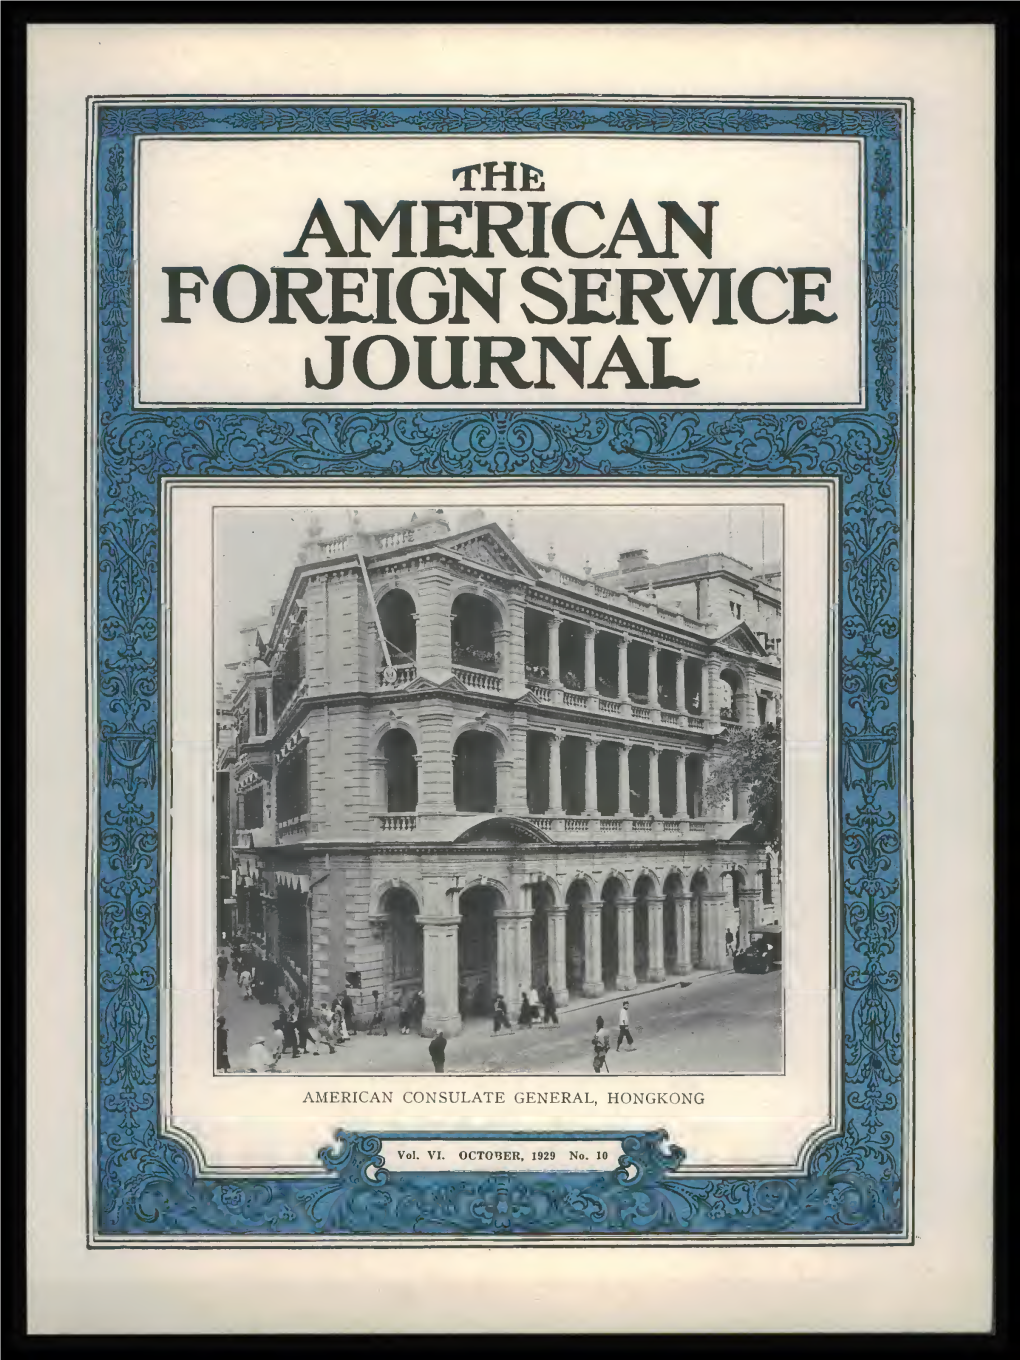 The Foreign Service Journal, October 1929